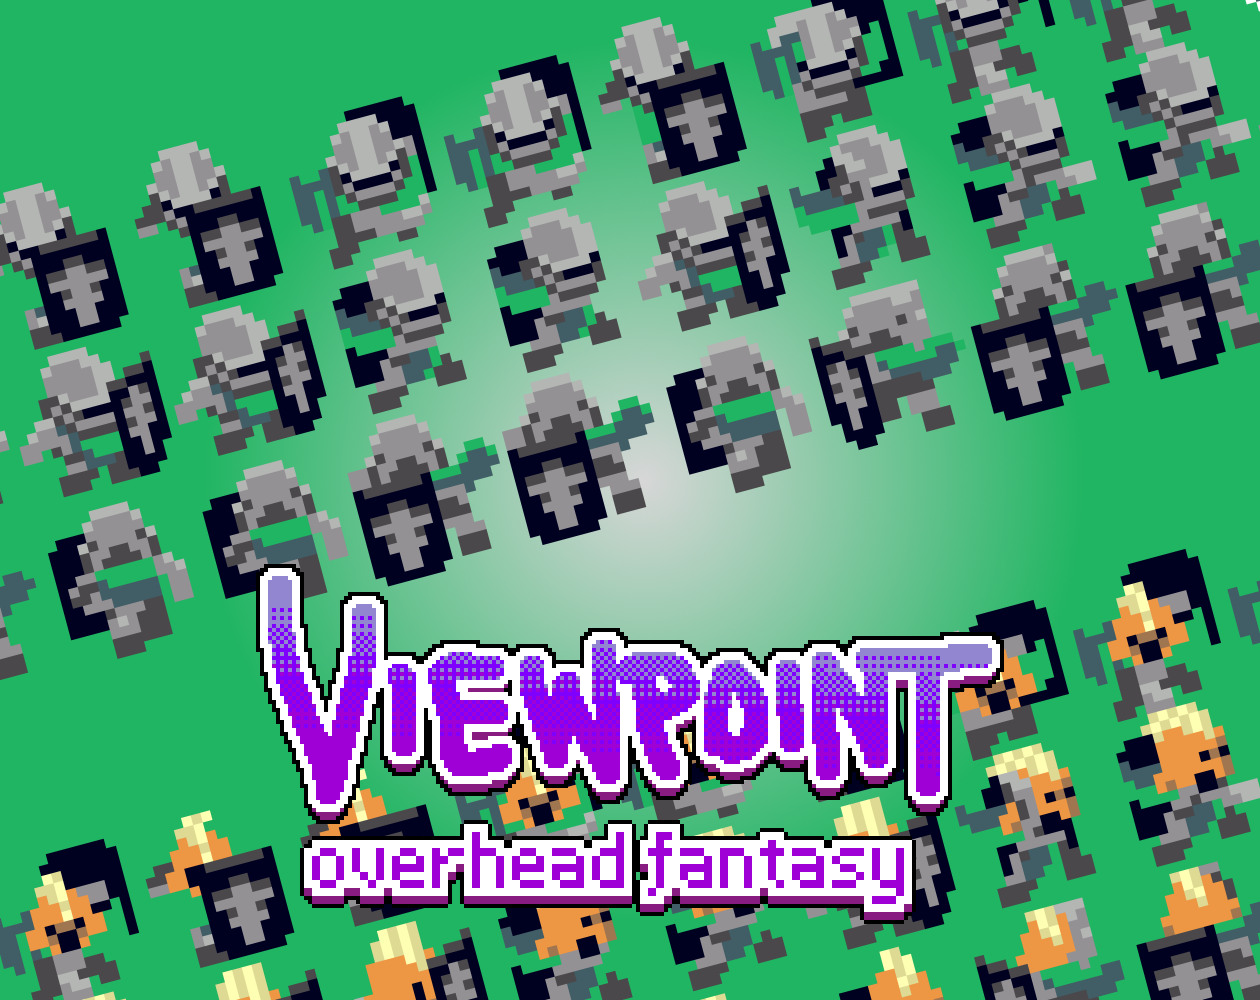 VIEWPOINT Overhead Fantasy Emerald Knight